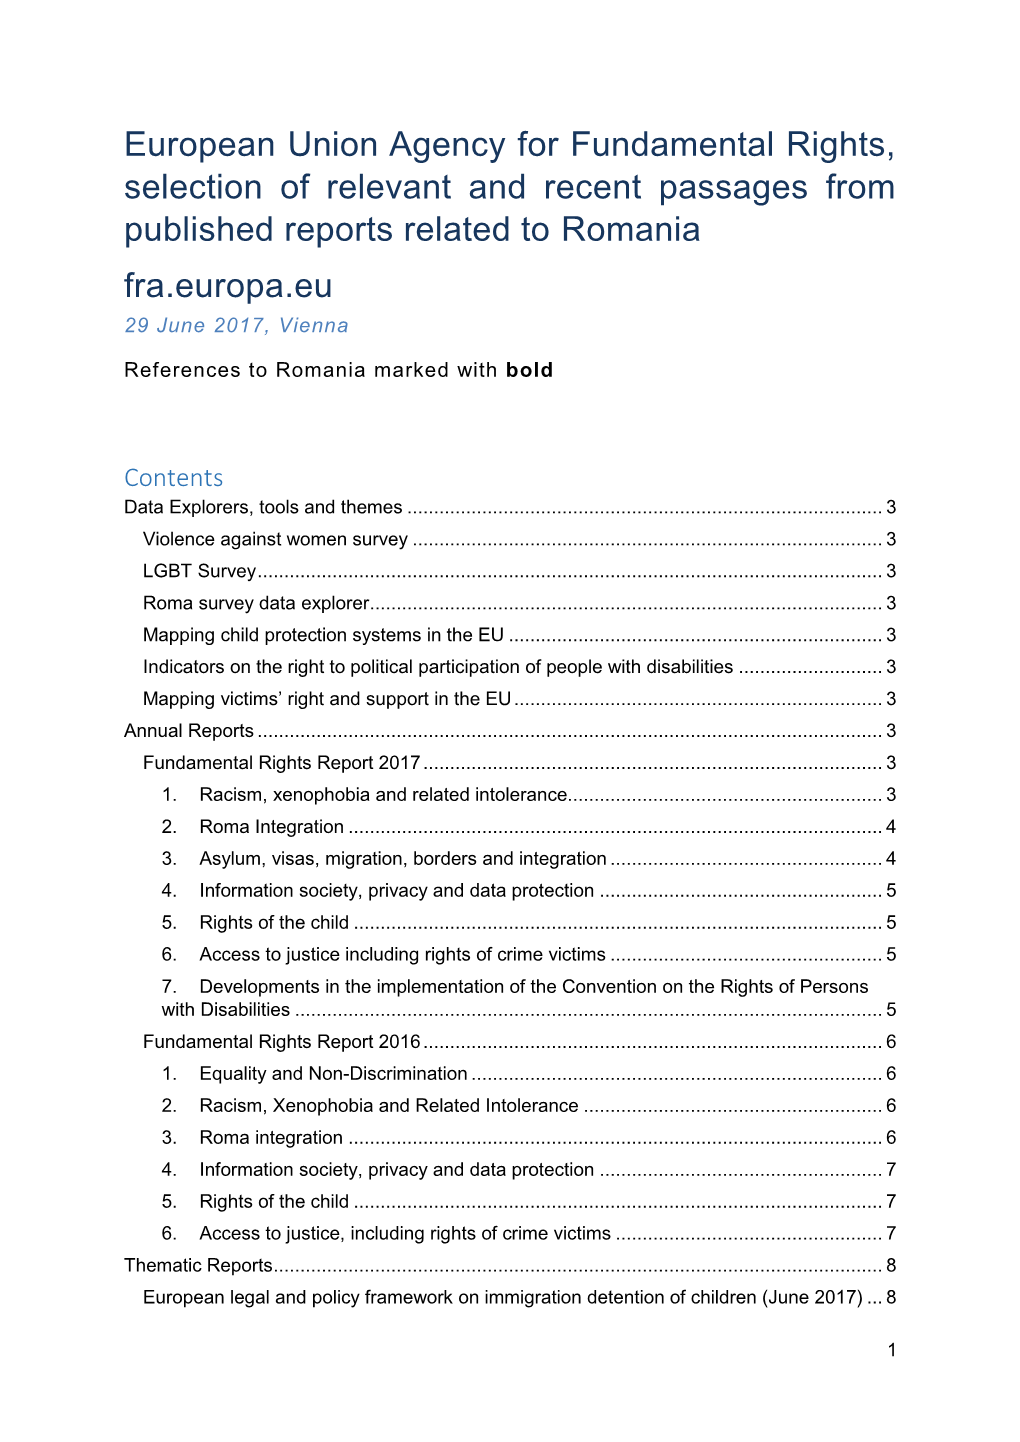 European Union Agency for Fundamental Rights, Selection of Relevant and Recent Passages from Published Reports Related to Romania Fra.Europa.Eu 29 June 2017, Vienna